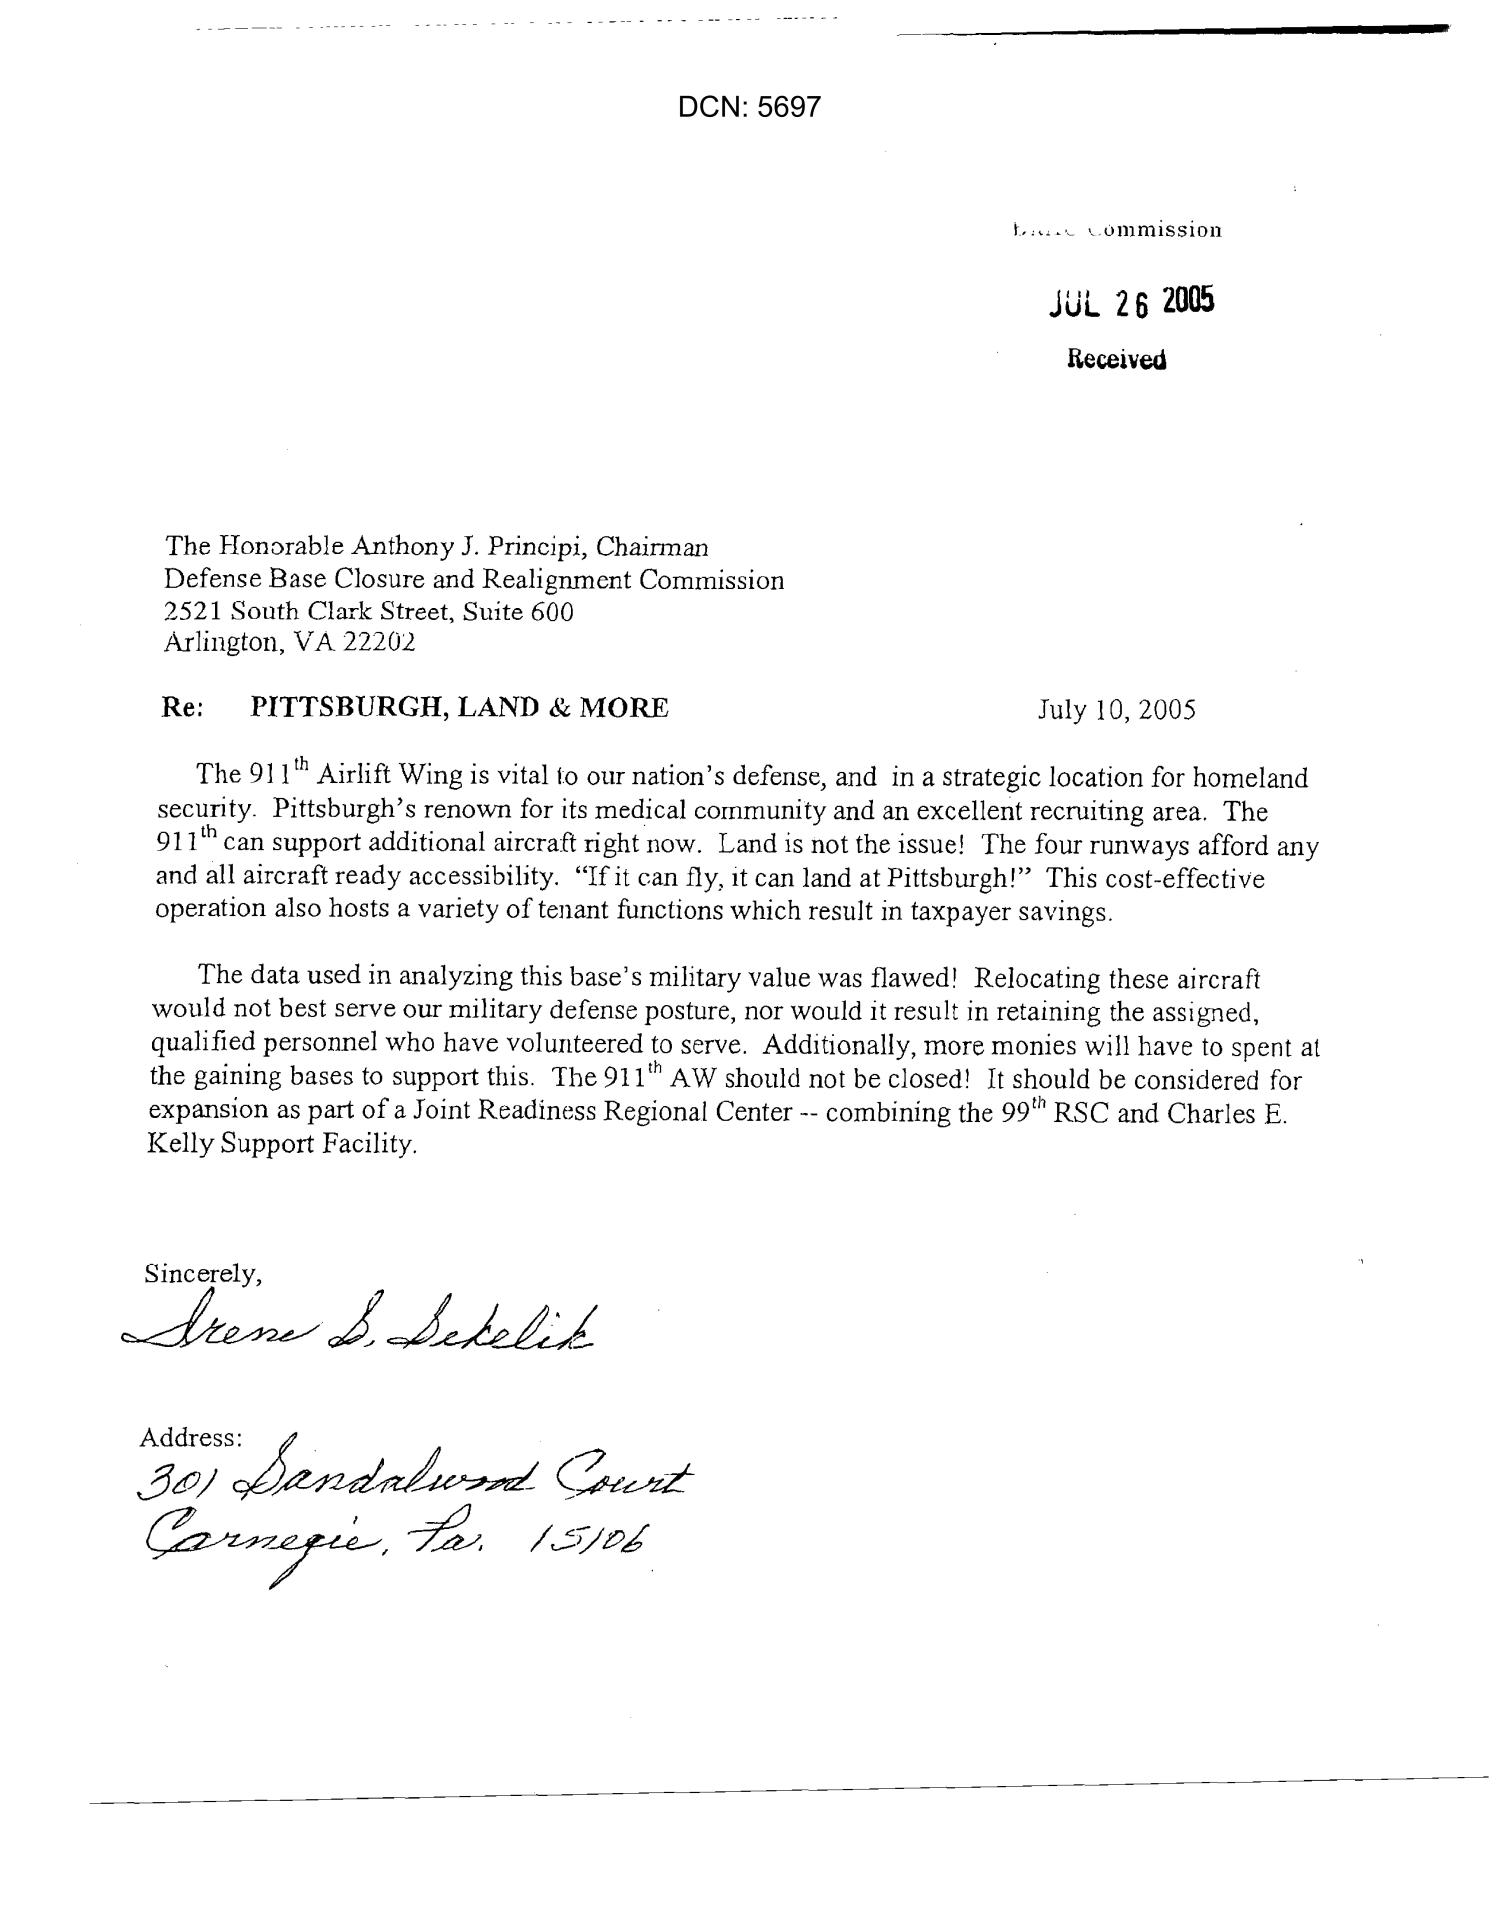 61 Individual Letters from concerned citizens regarding the closing of the Pittsburgh 911th Airlift Wing
                                                
                                                    [Sequence #]: 1 of 61
                                                